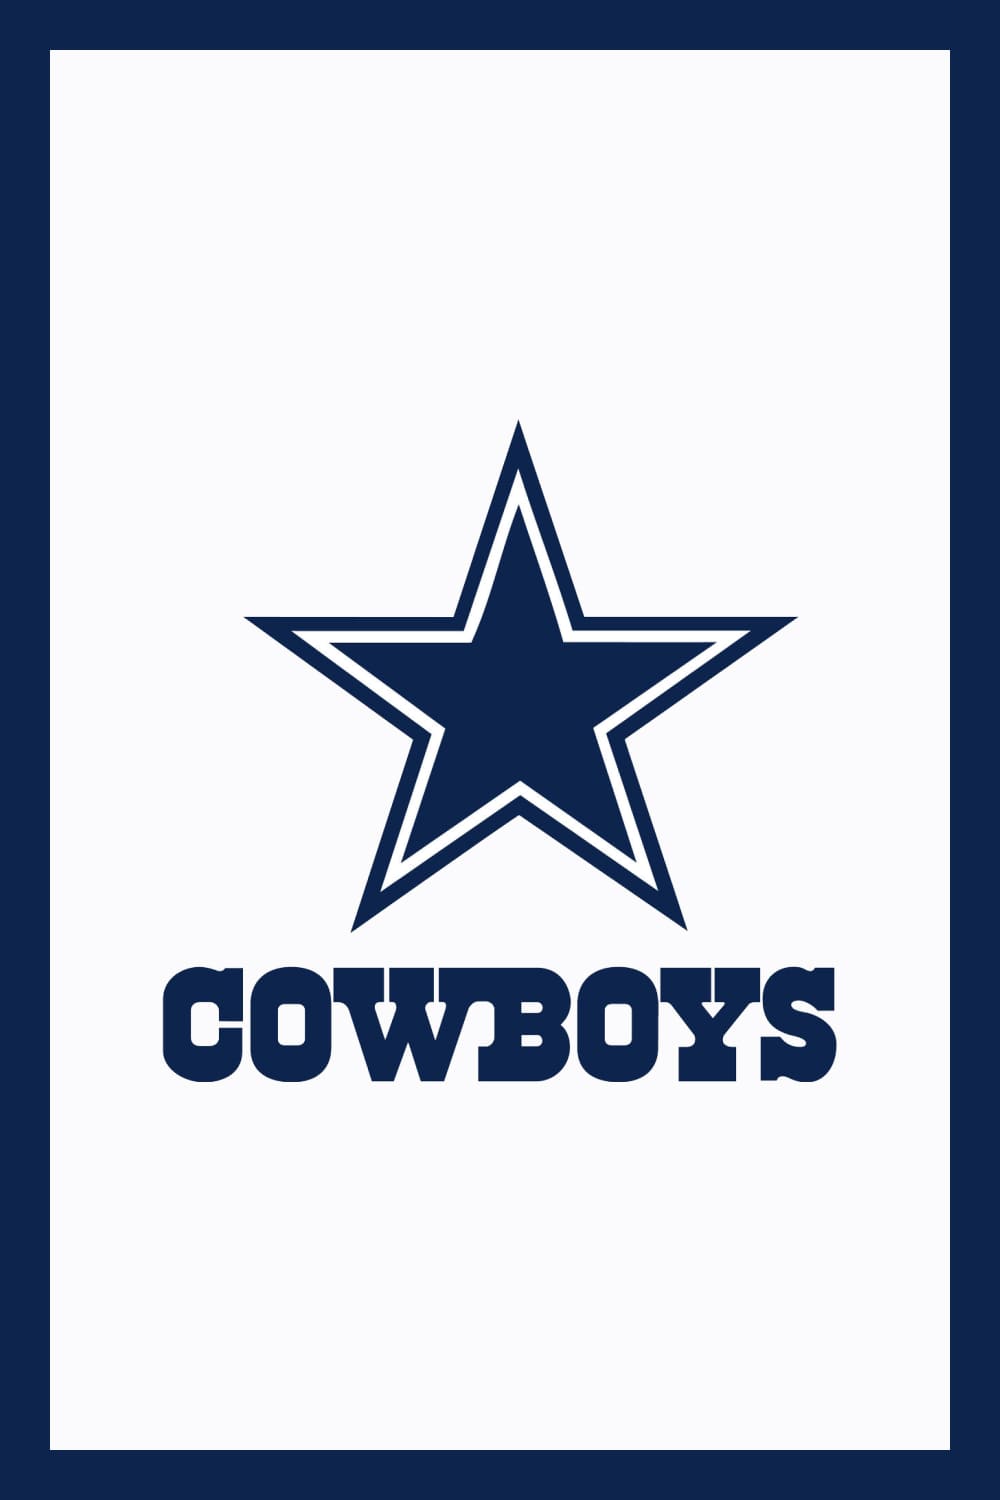 Blue star and blue text COWBOYS.